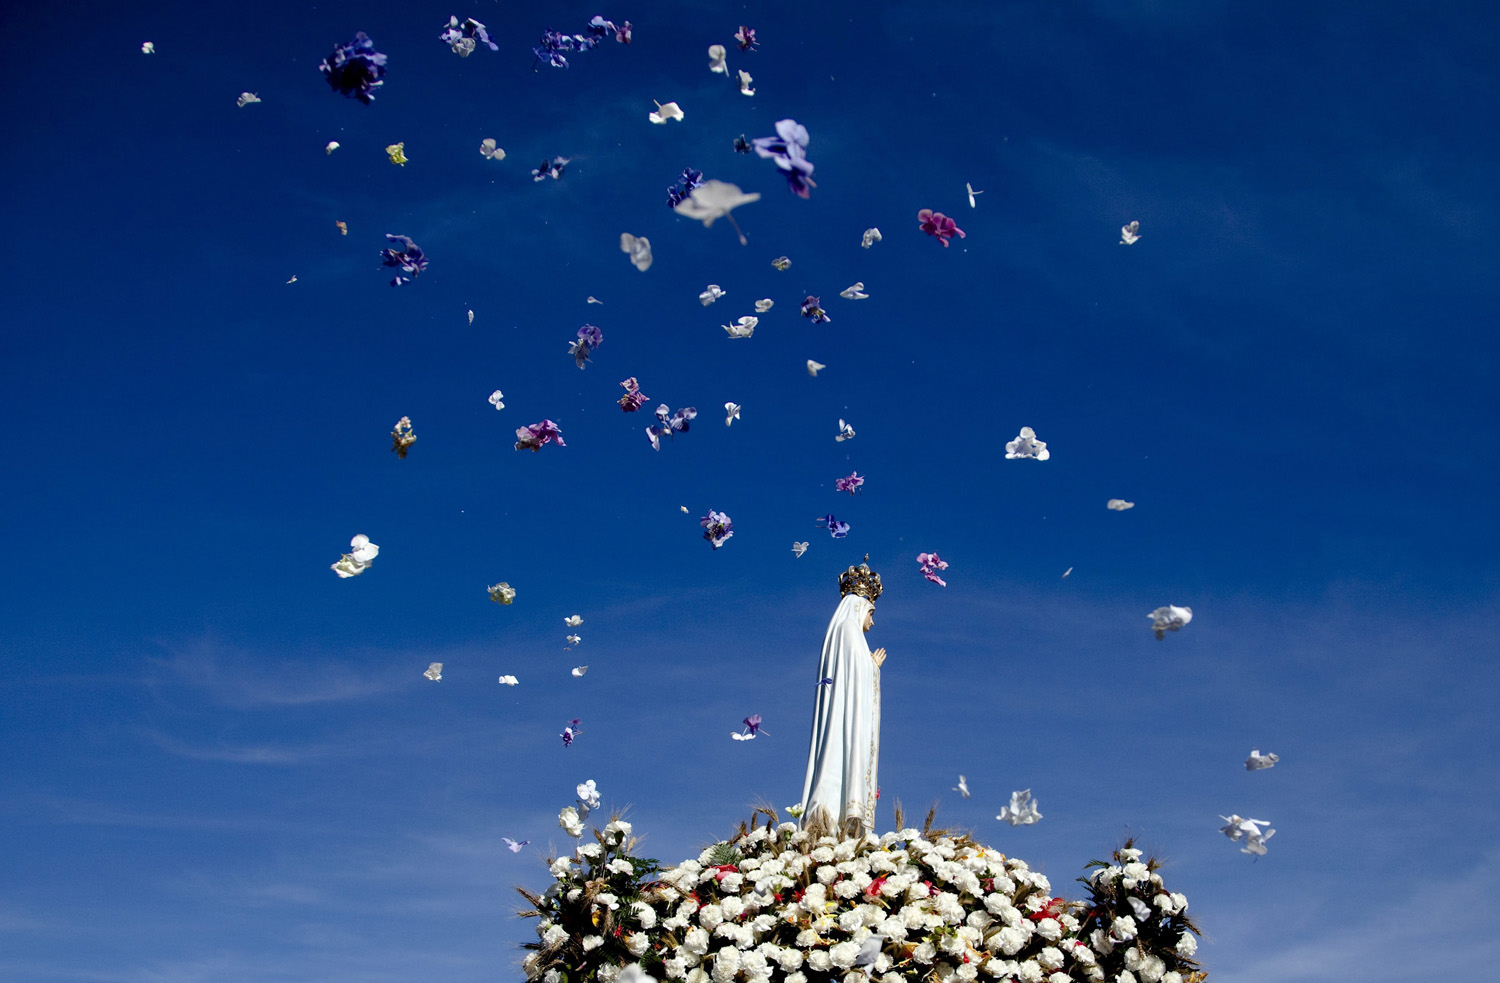 Flowers are thrown in the air as the Image of Our Lady of Fatima is carried over at the Fatima Sanctuary during the pilgrimage at Fatima Sanctuary, in Fatima, Portugal on August 13, 2014.